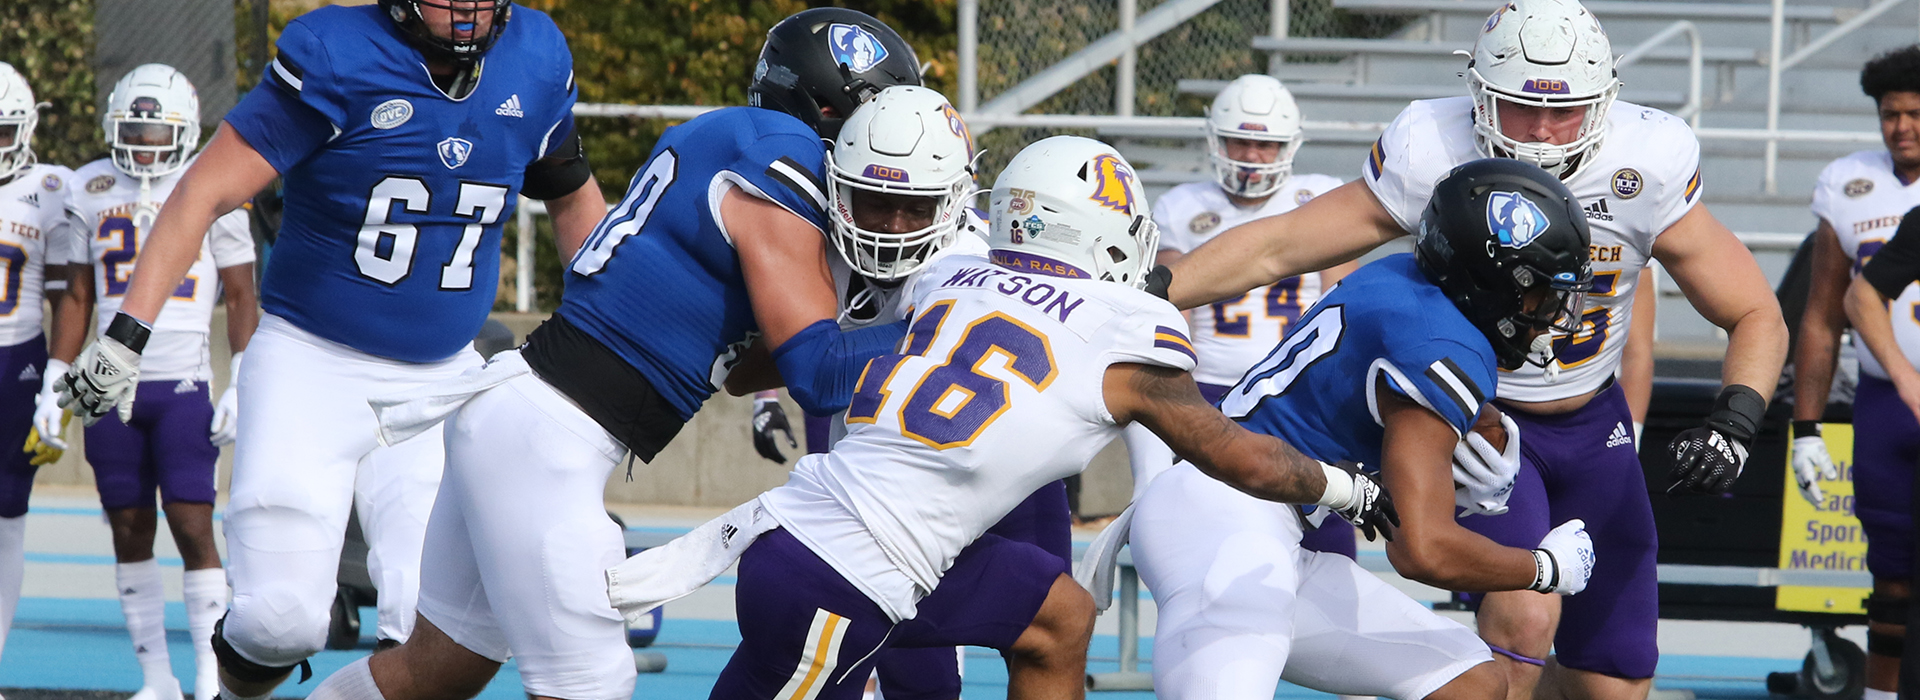 Defense stands tall as Golden Eagles rally to top Eastern Illinois